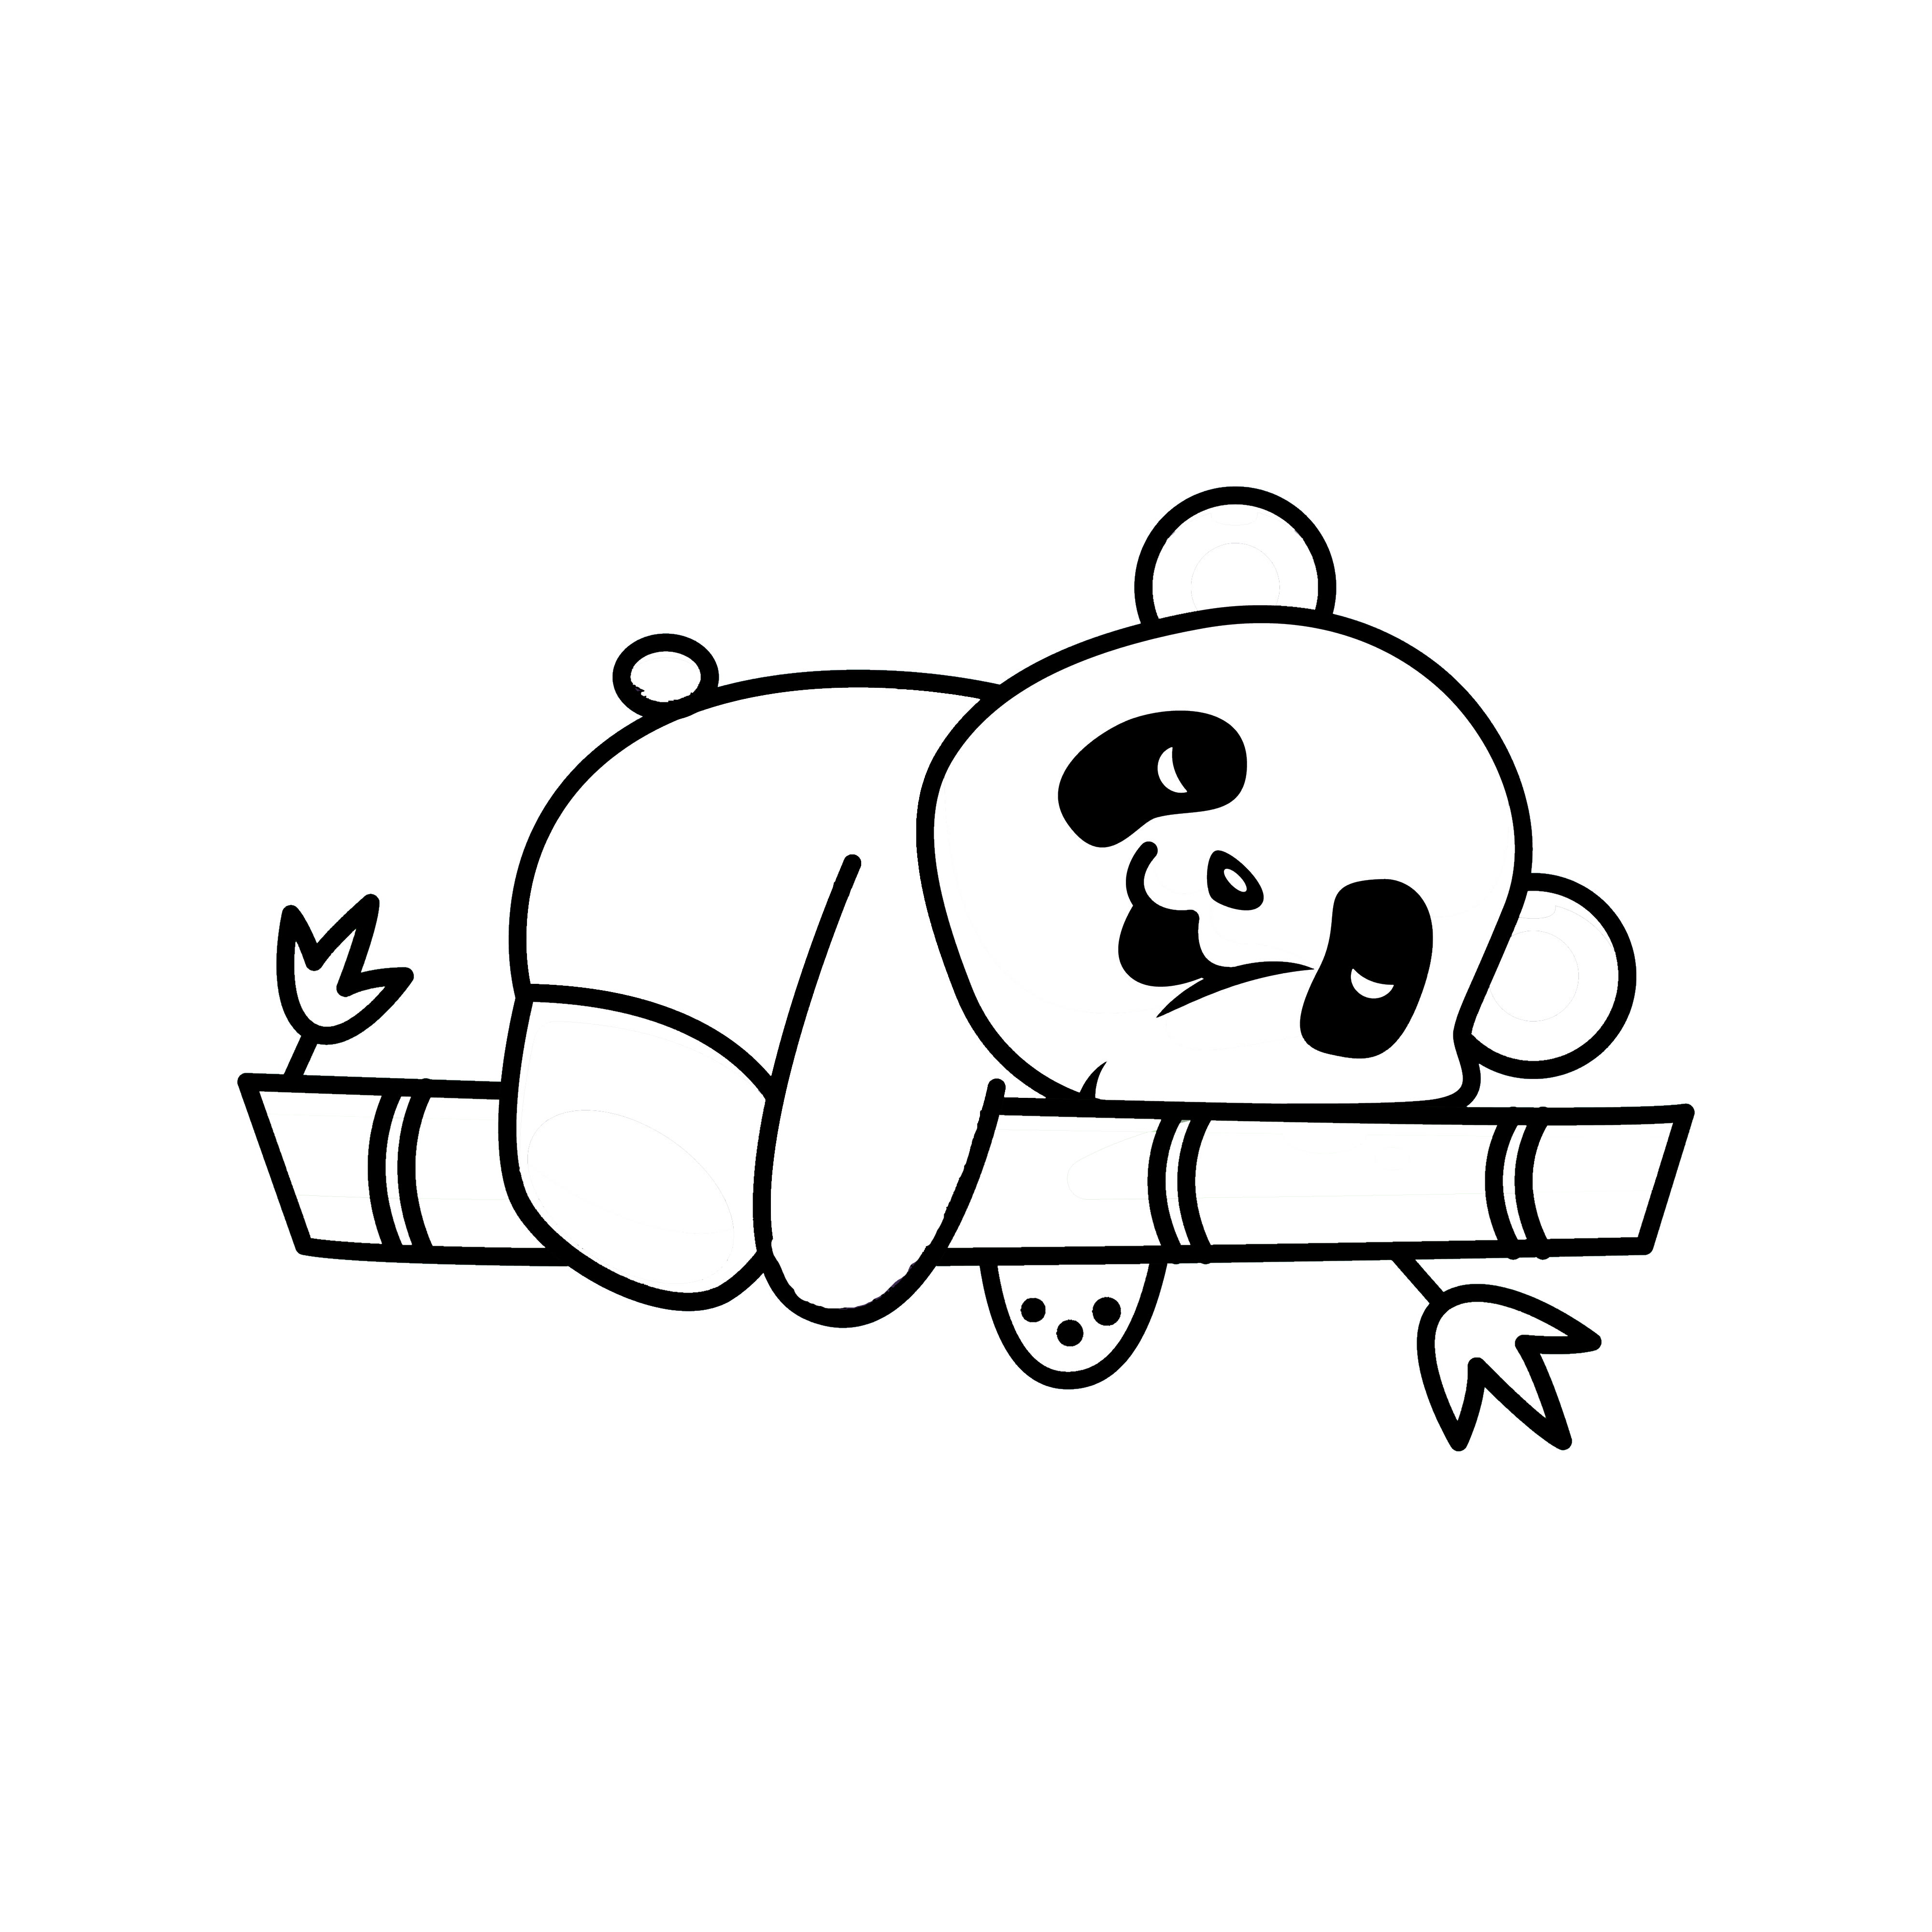 Give you access to my cute animals coloring pages by ...